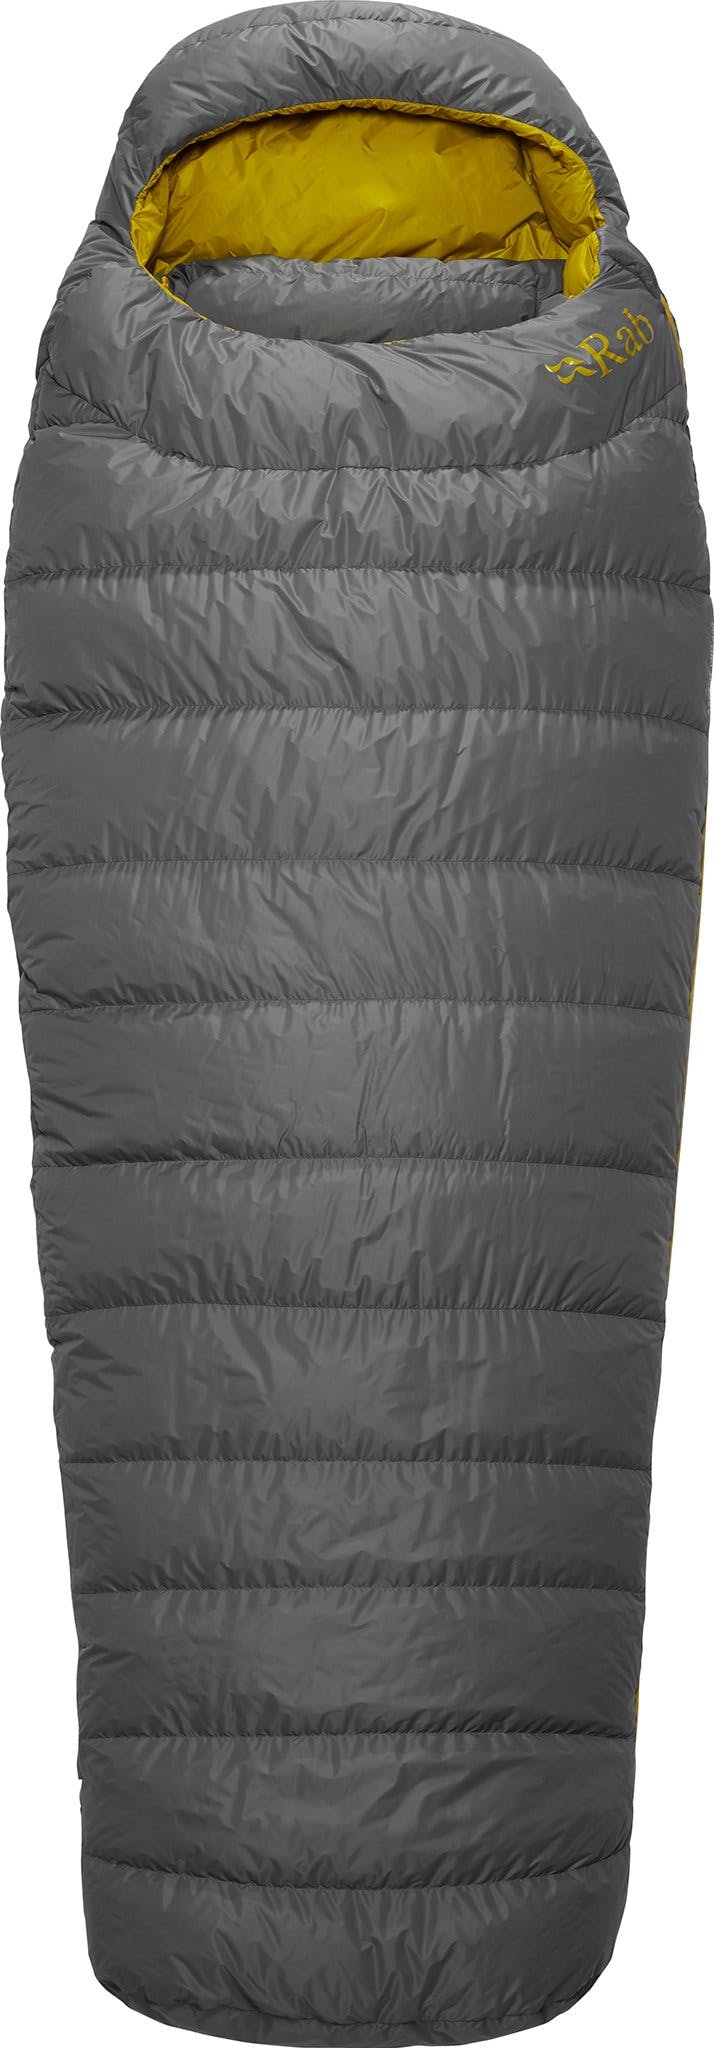 Product image for Ascent Pro 800 -15°C/5°F Down Sleeping Bag - Women's